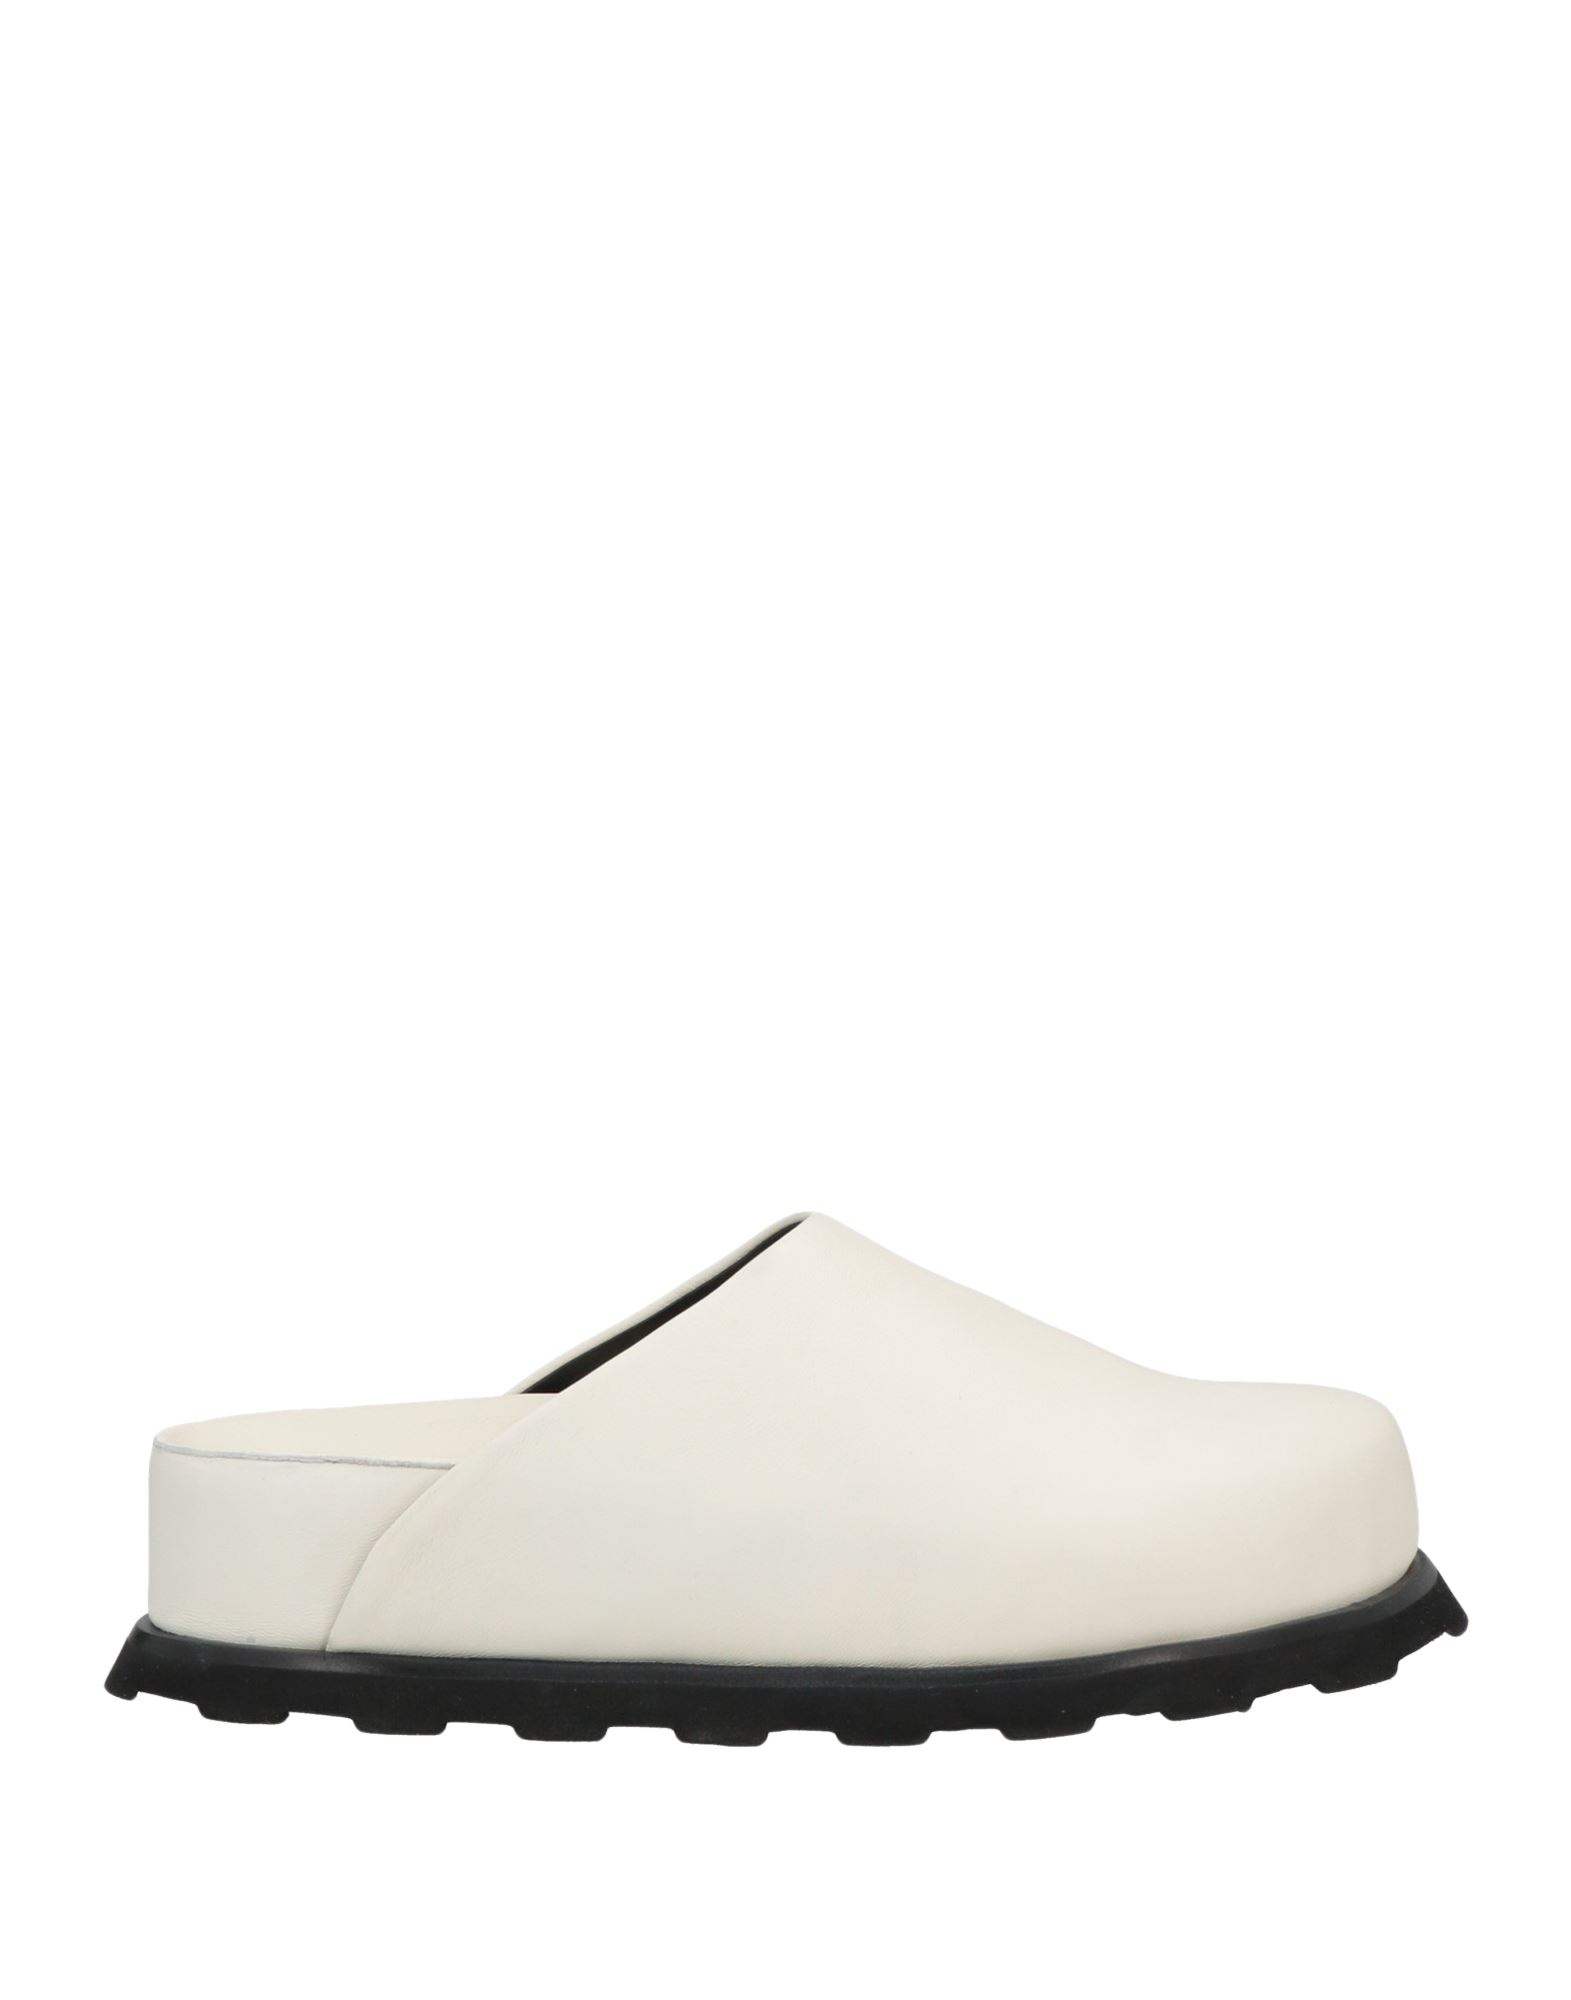 Proenza Schouler Woman Mules & Clogs Ivory Size 6 Soft Leather In White